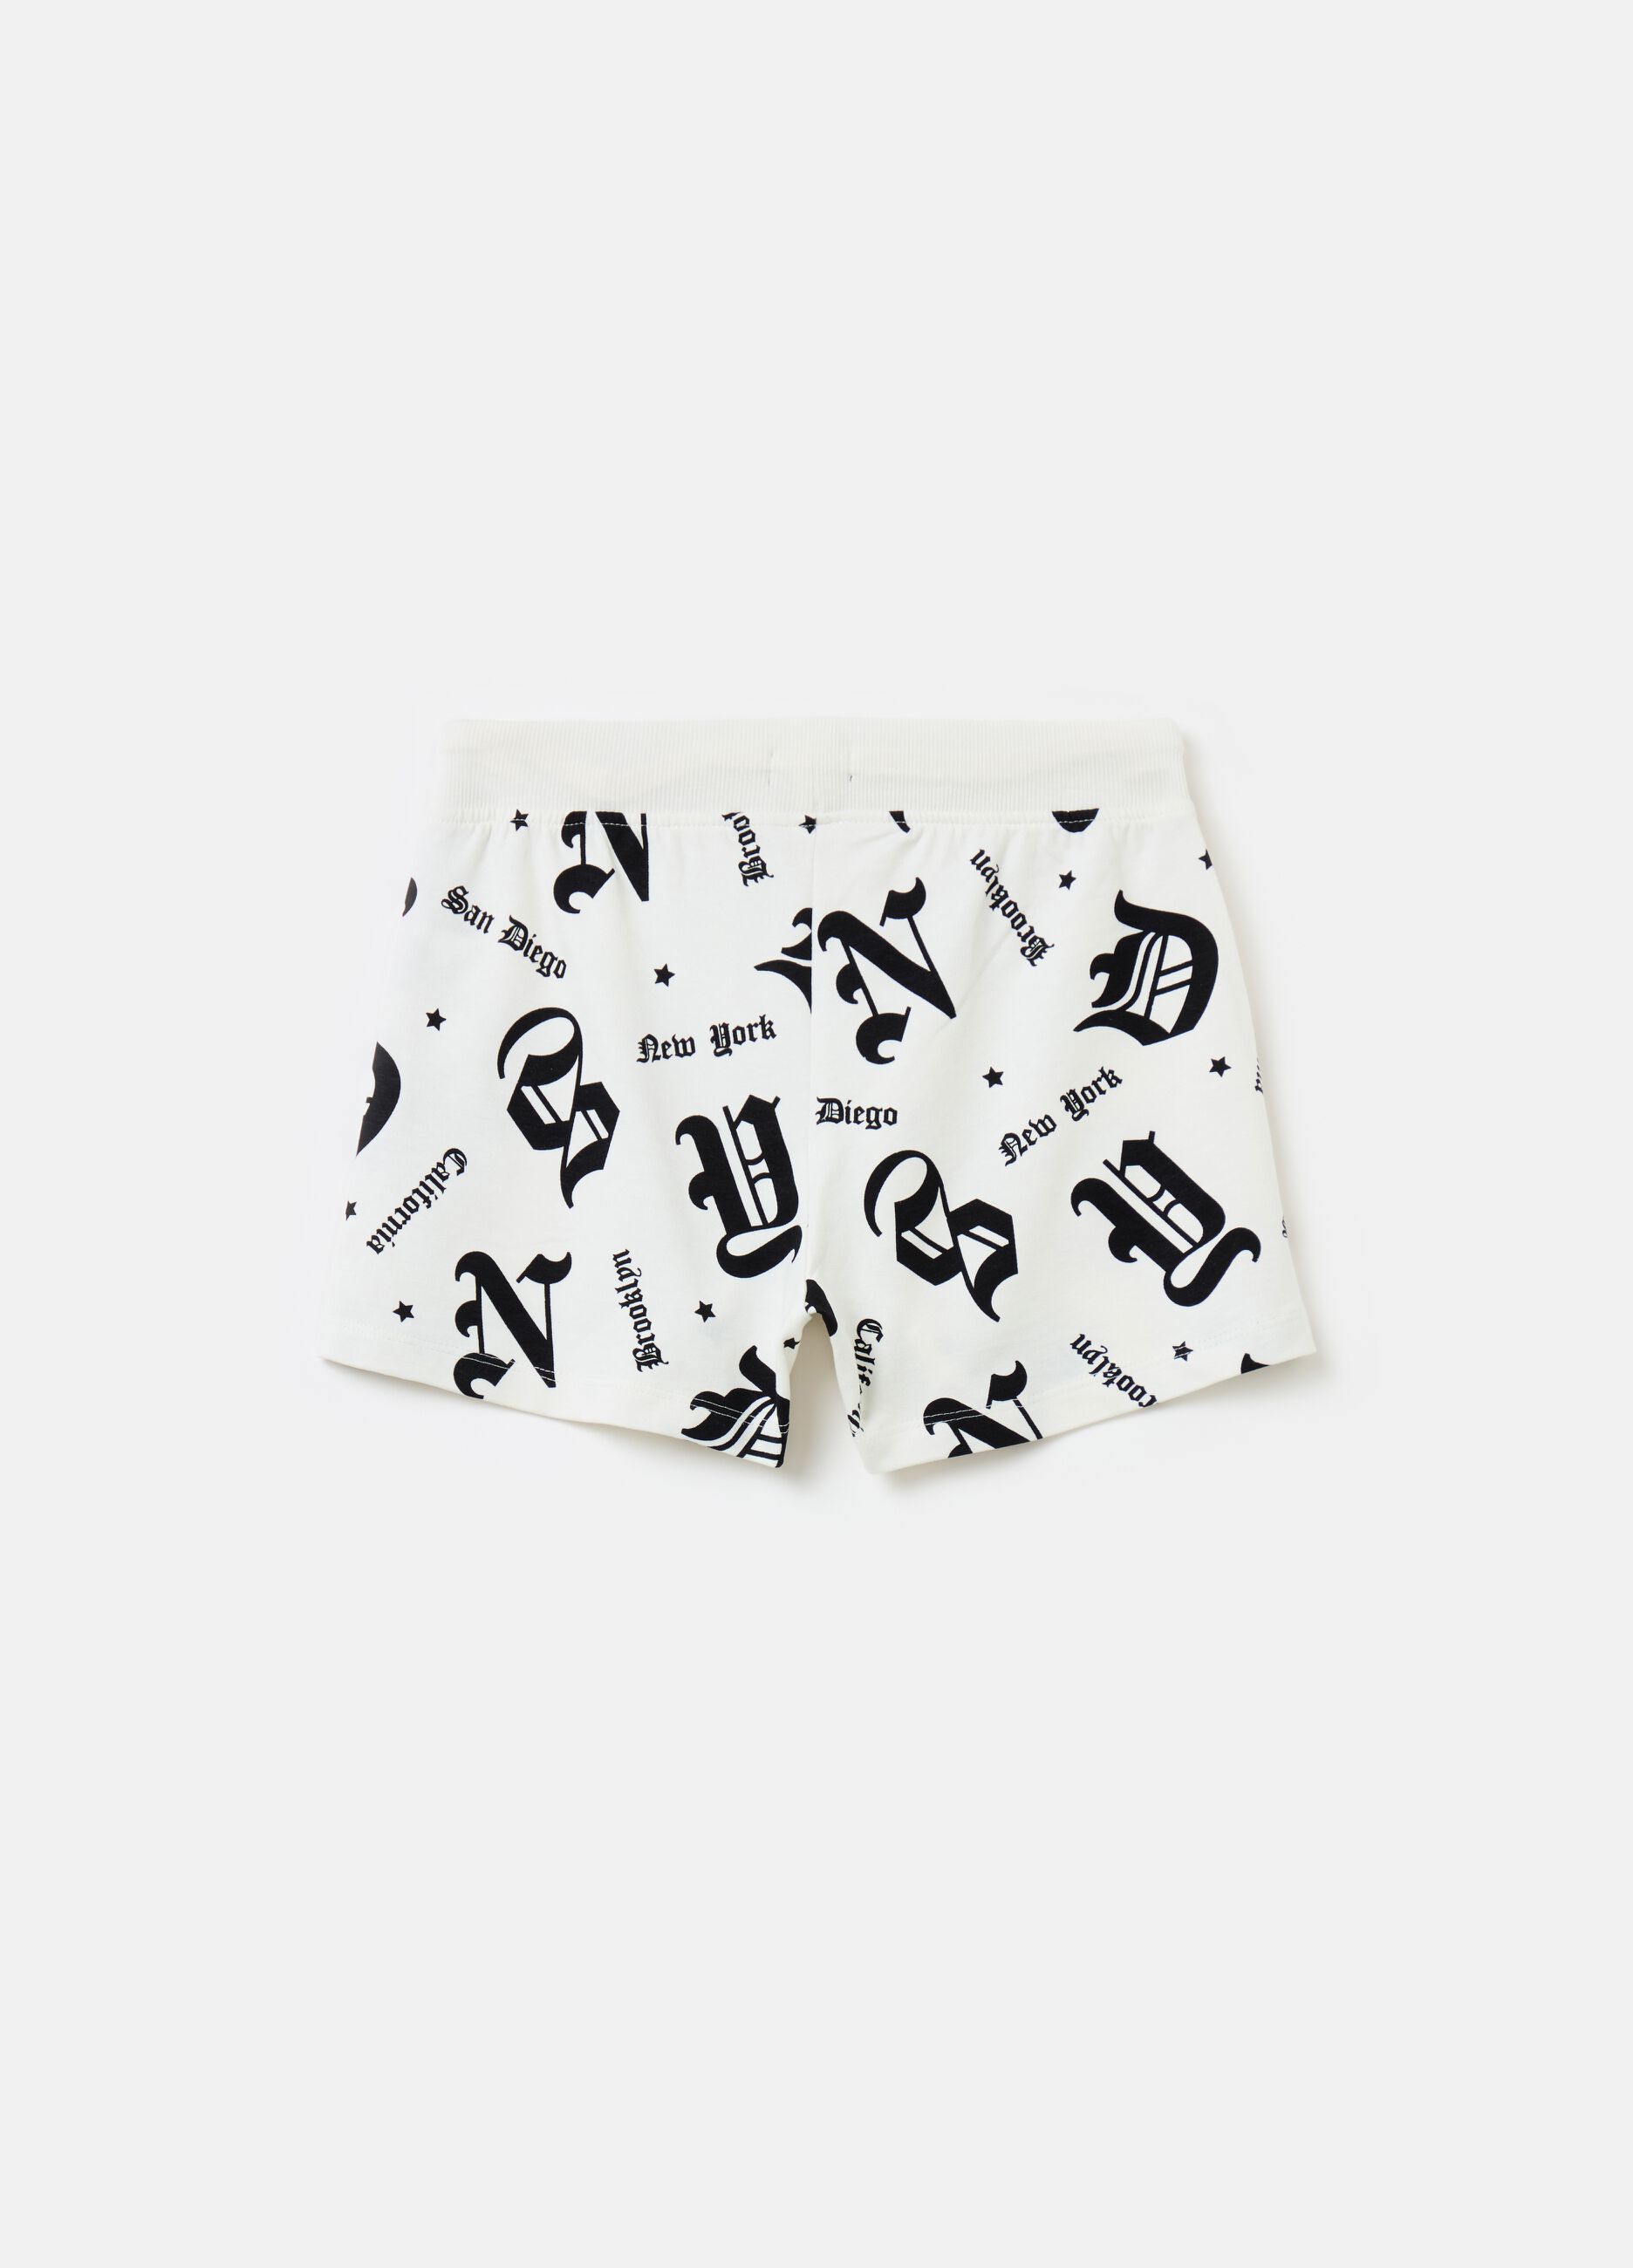 Cotton shorts with drawstring and print